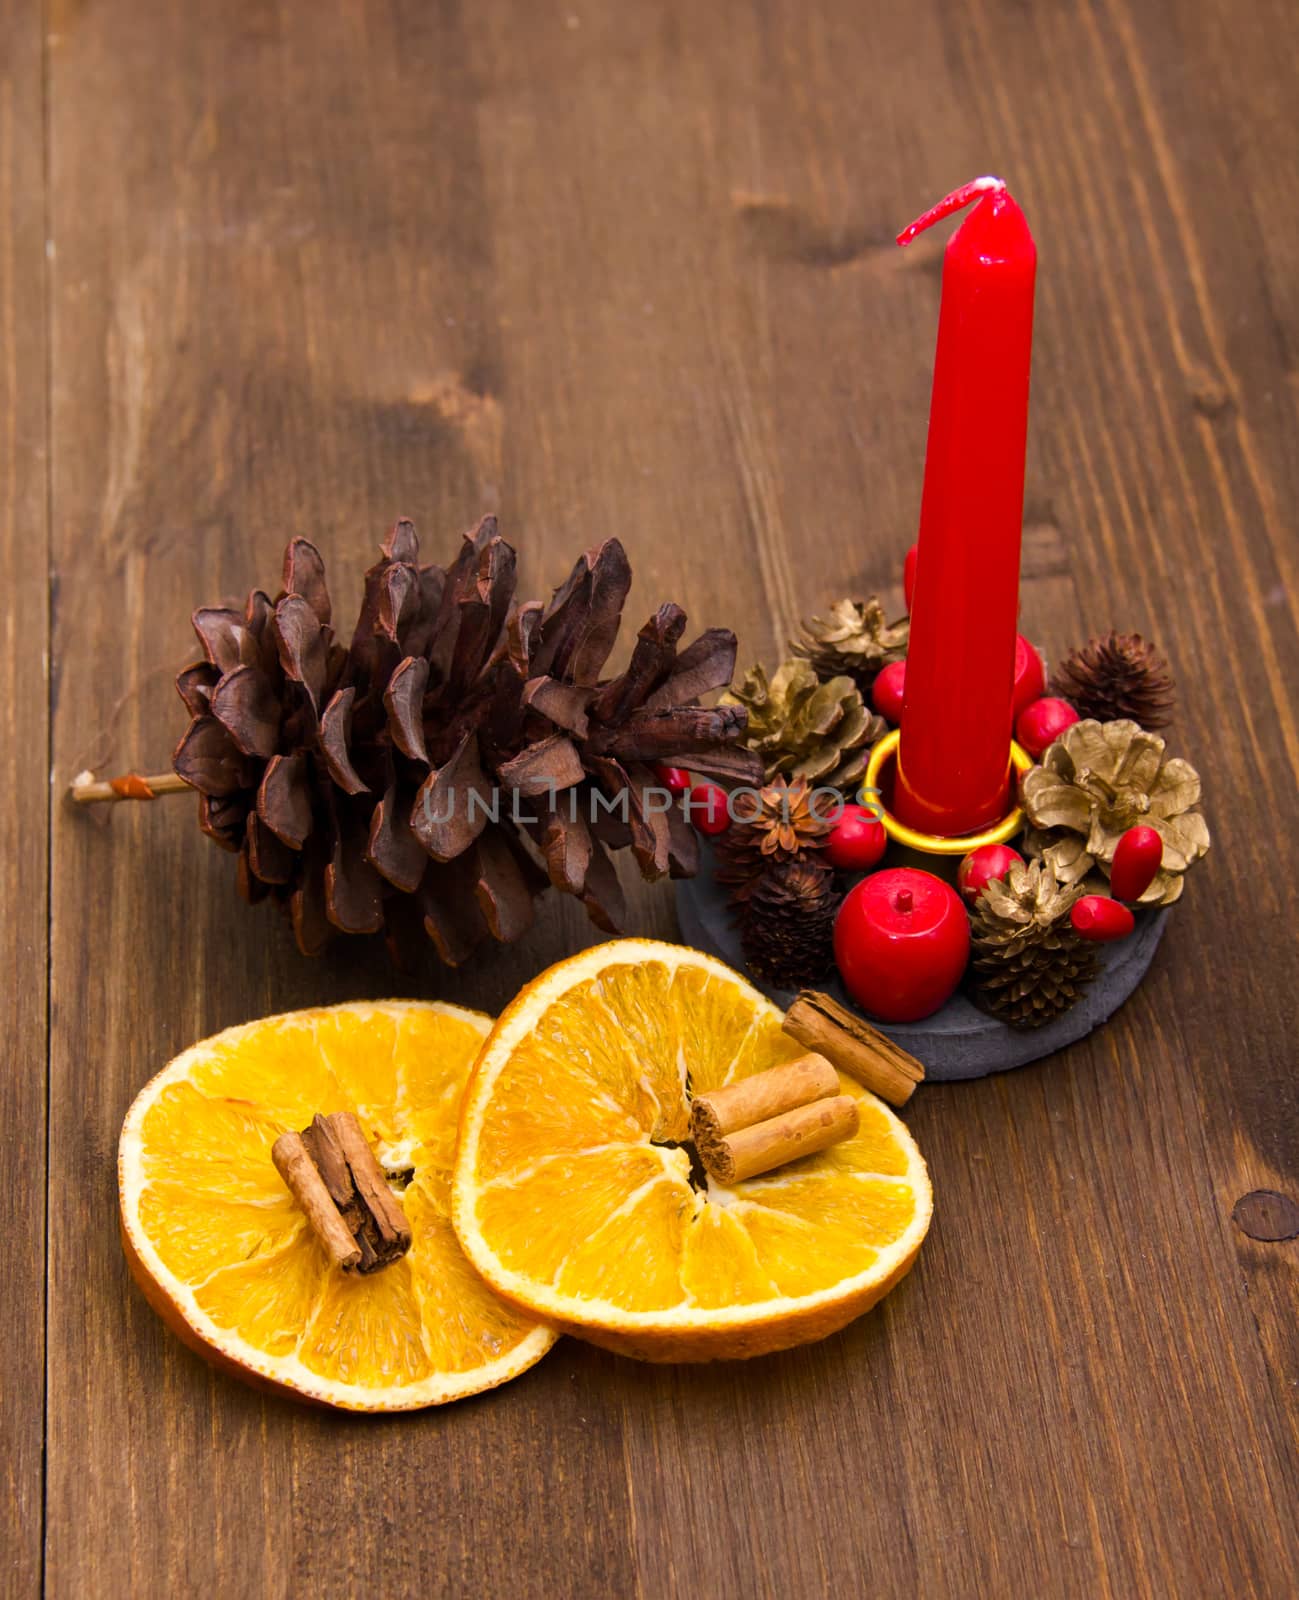 Candle with Christmas decorations on wooden table